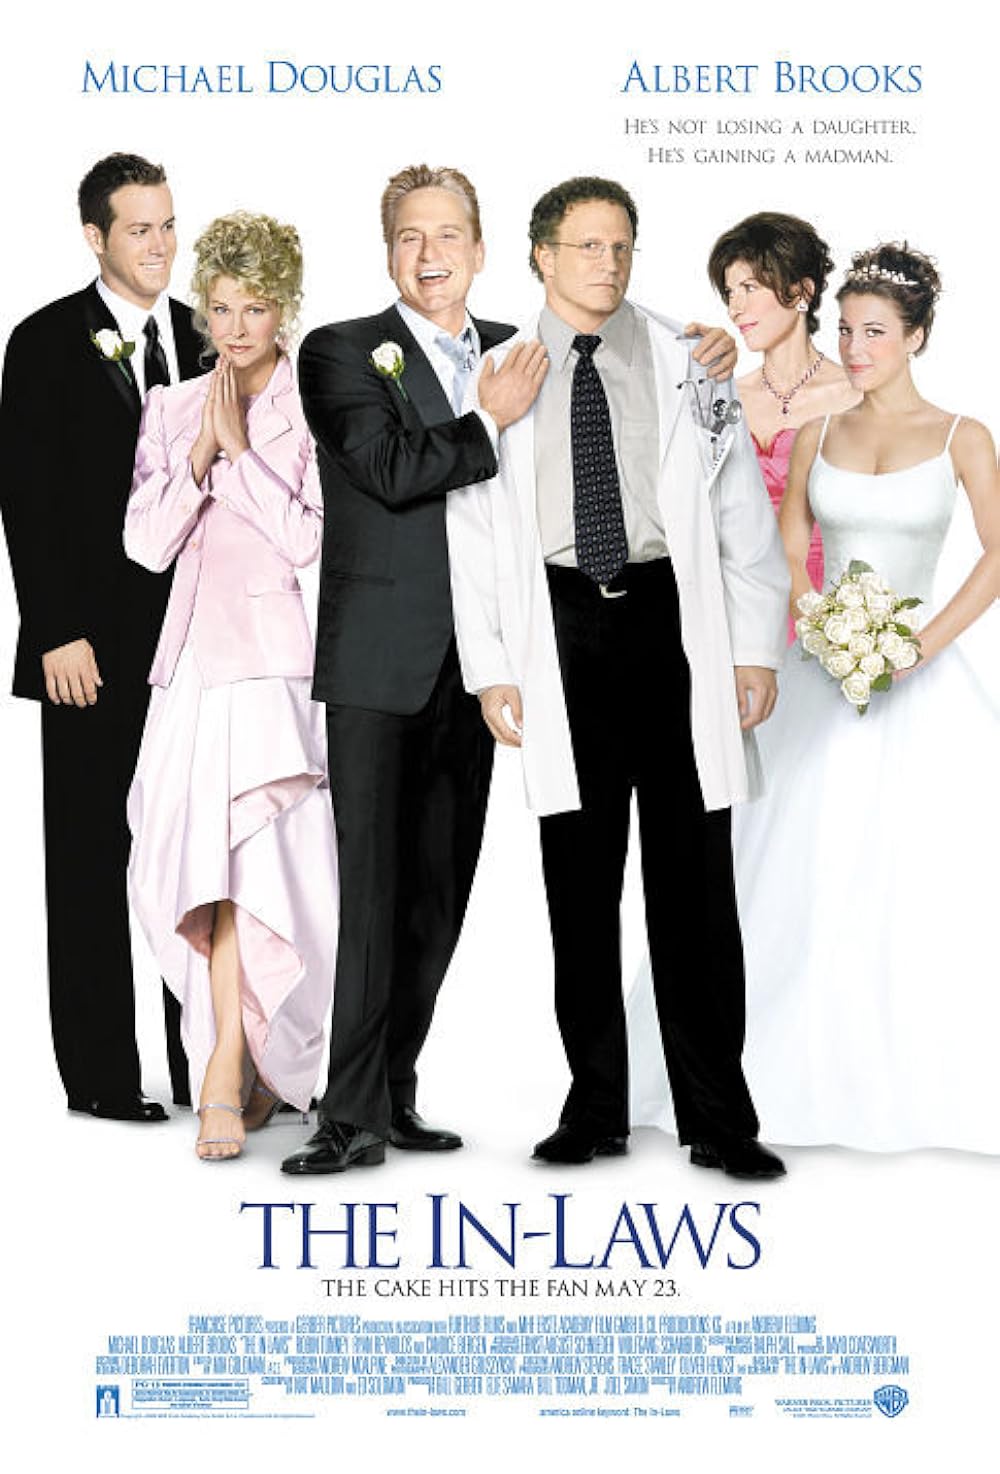 The In-Laws (2003) 192Kbps 23.976Fps 48Khz 2.0Ch DVD Turkish Audio TAC